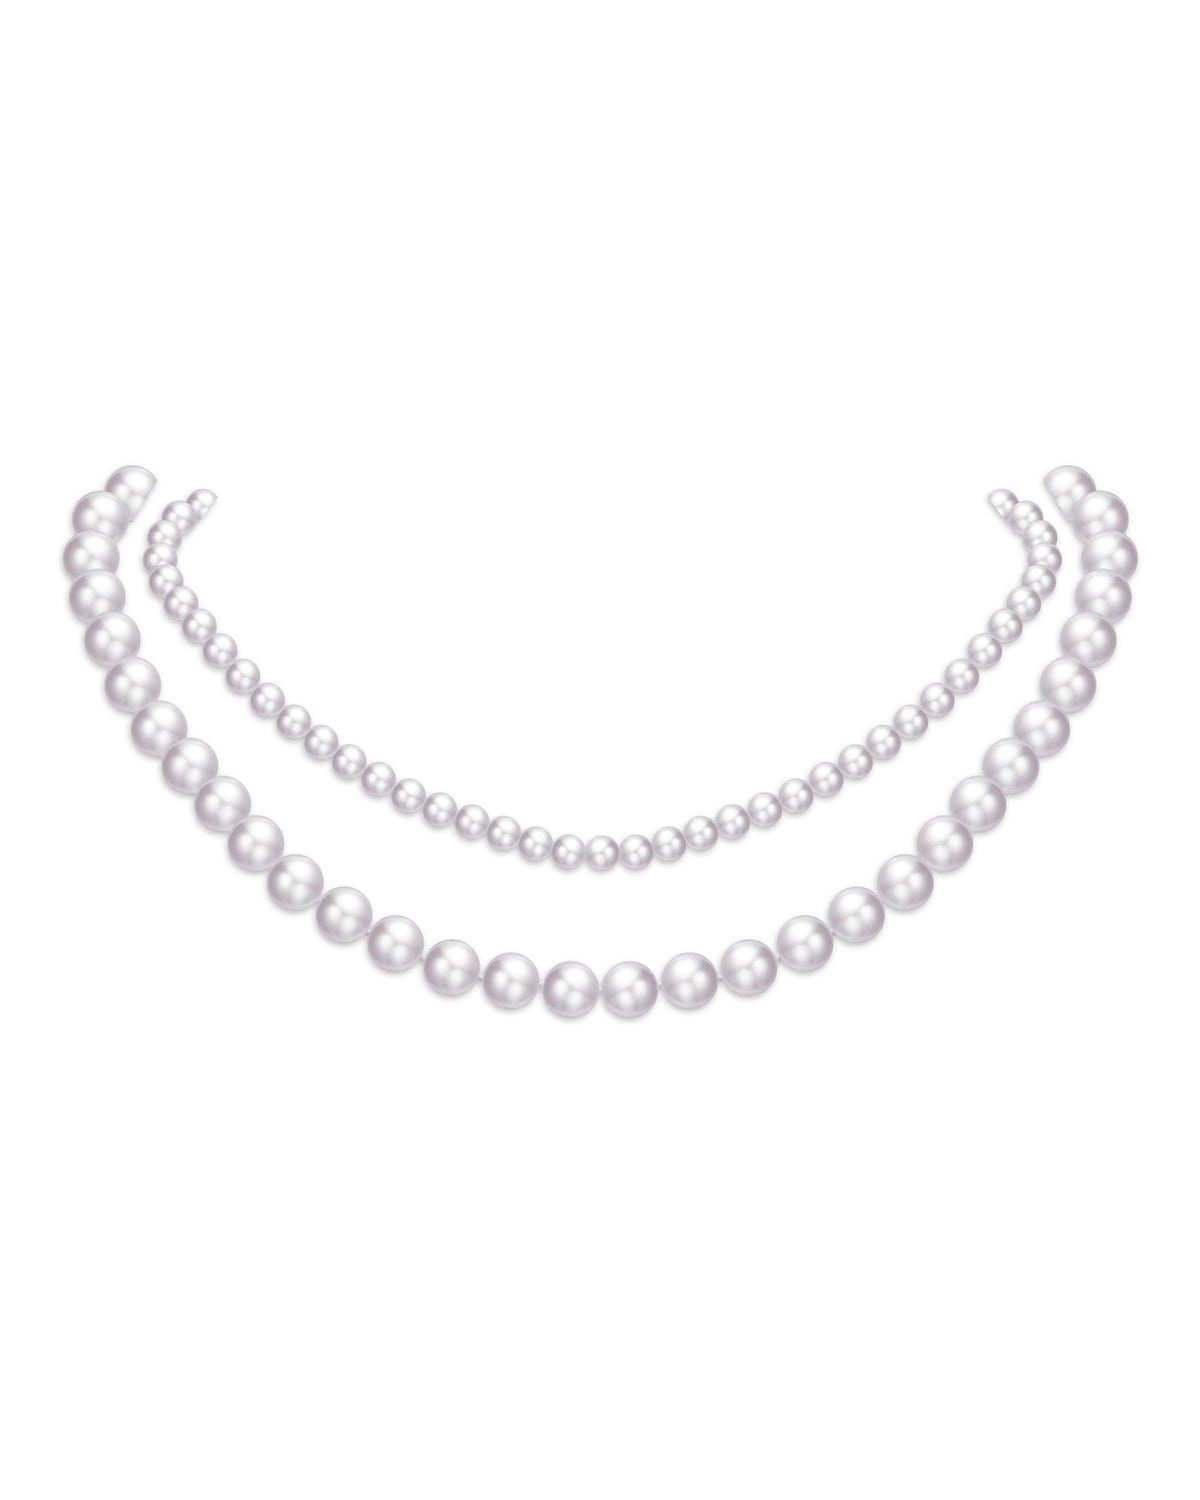 5.5-6.5mm Japanese Akoya White Pearl Necklace- AA+ Quality